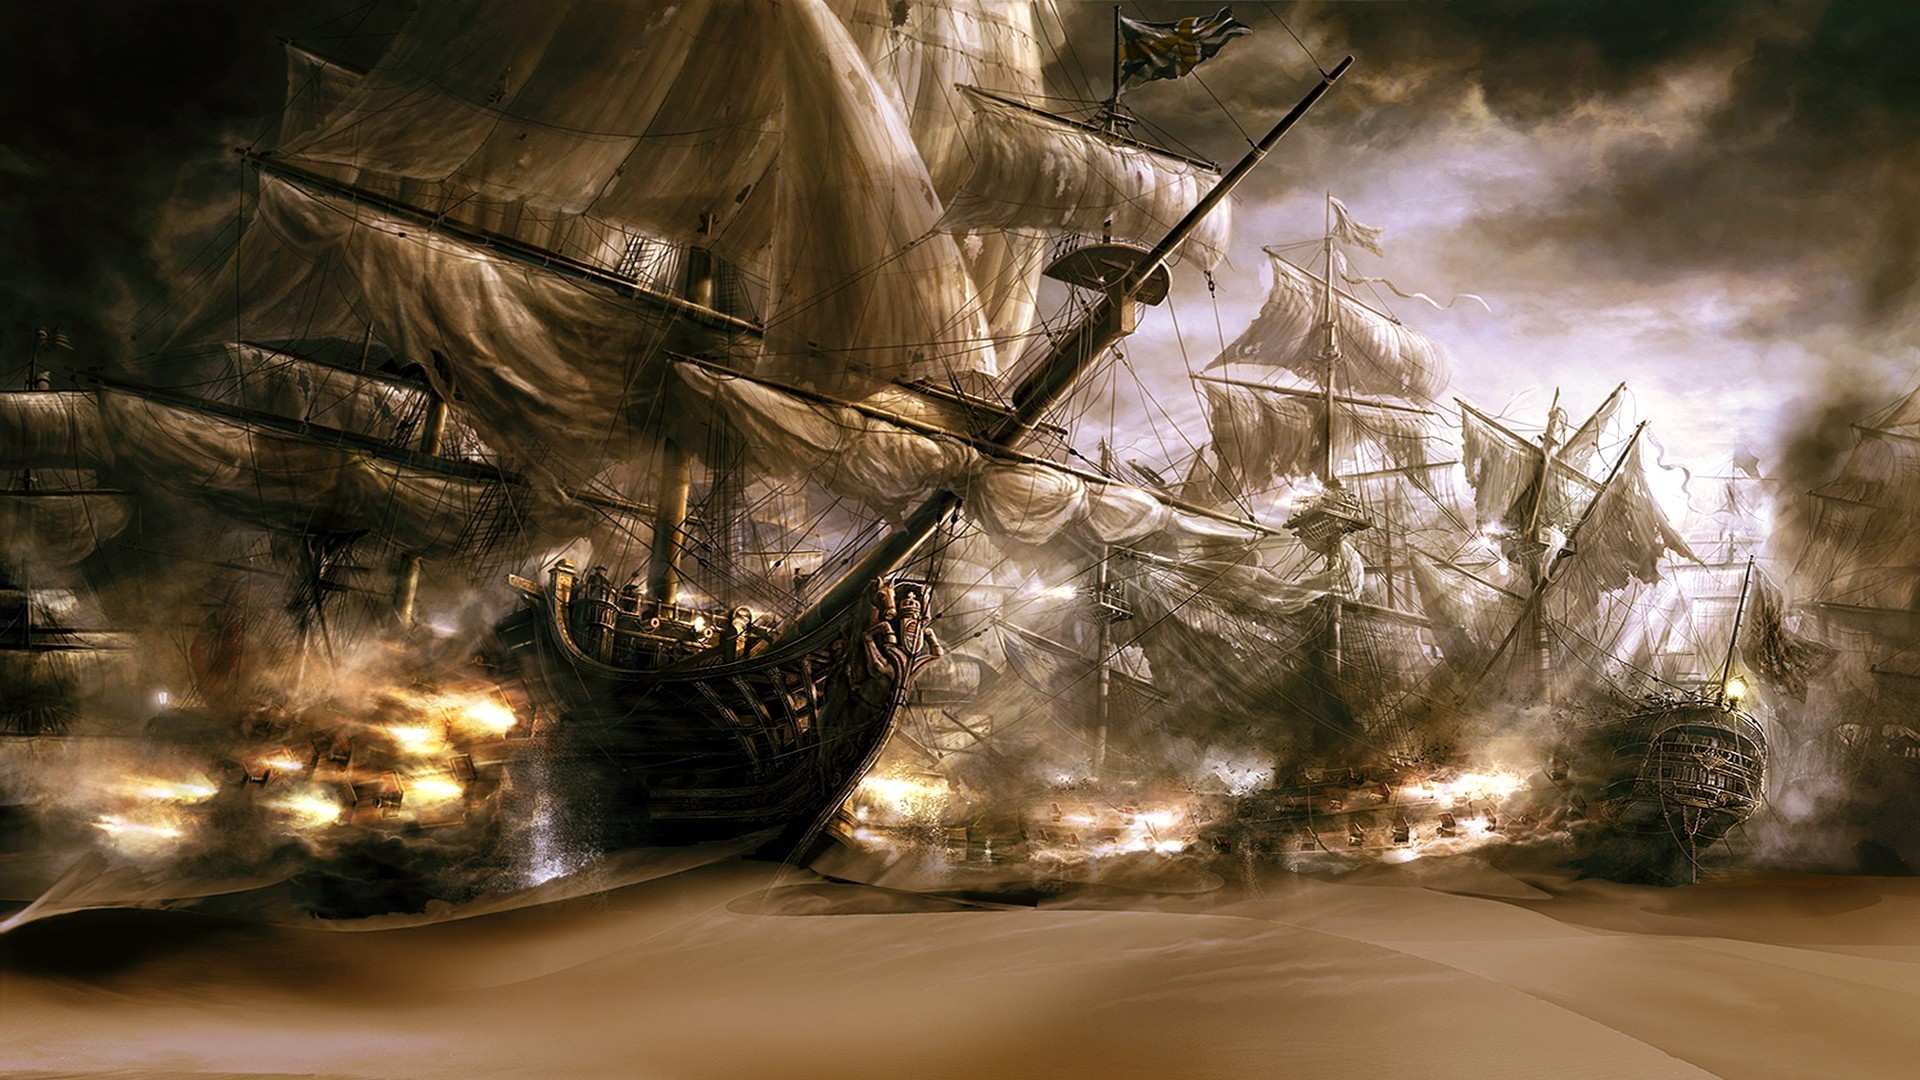 1920x1080 Ghost Pirate Ship Wallpaper For Iphone